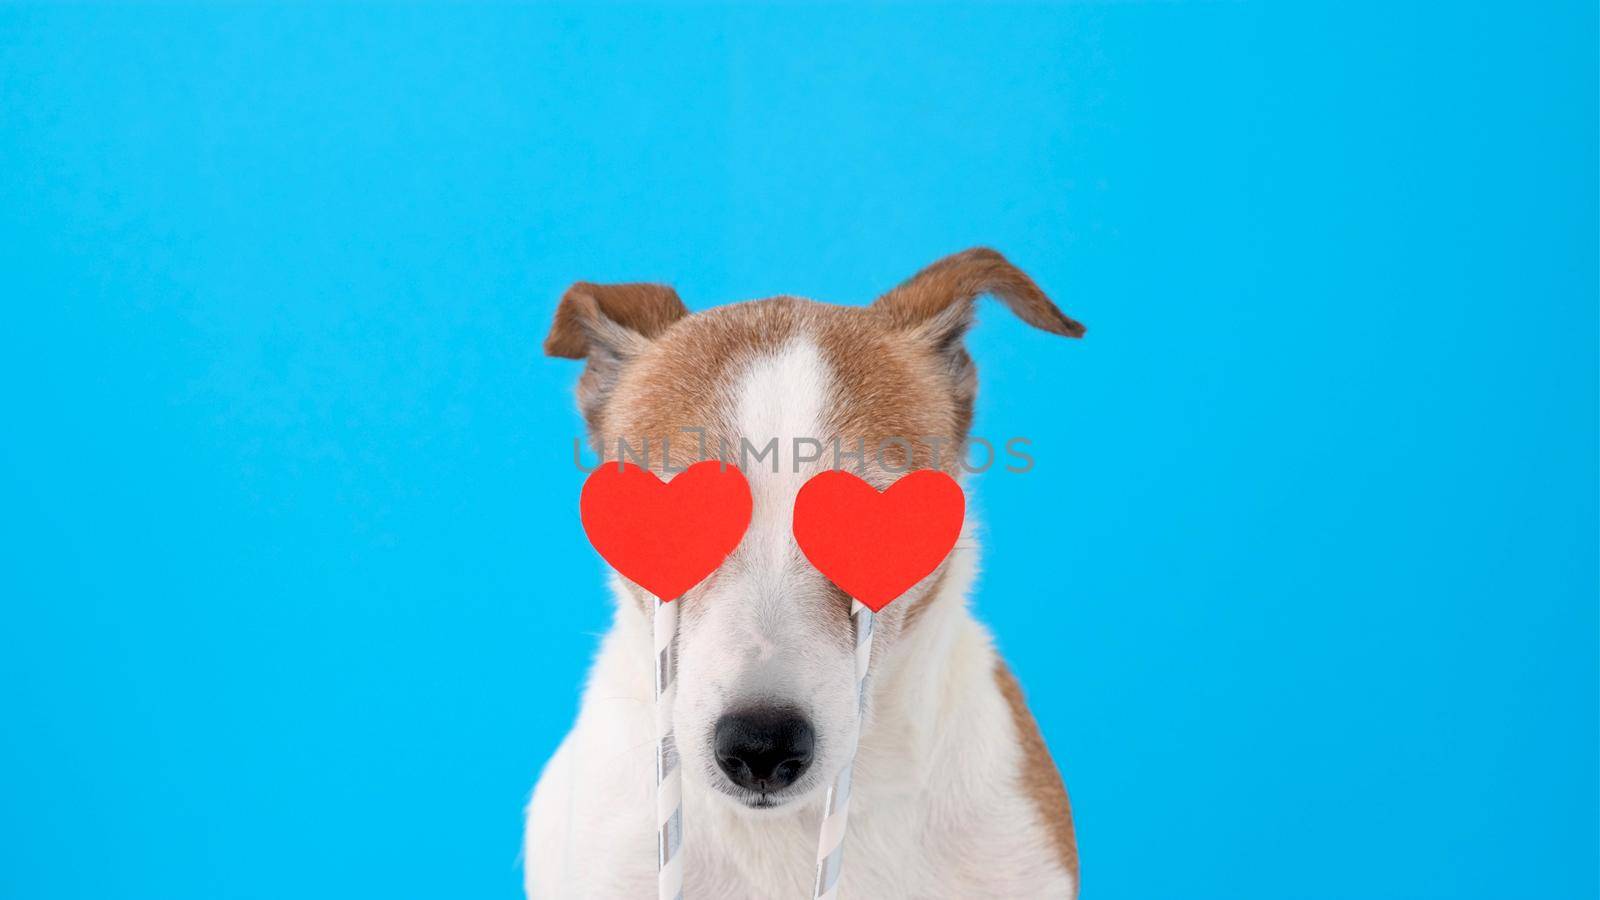 Dog with hearts instead of eyes by Demkat